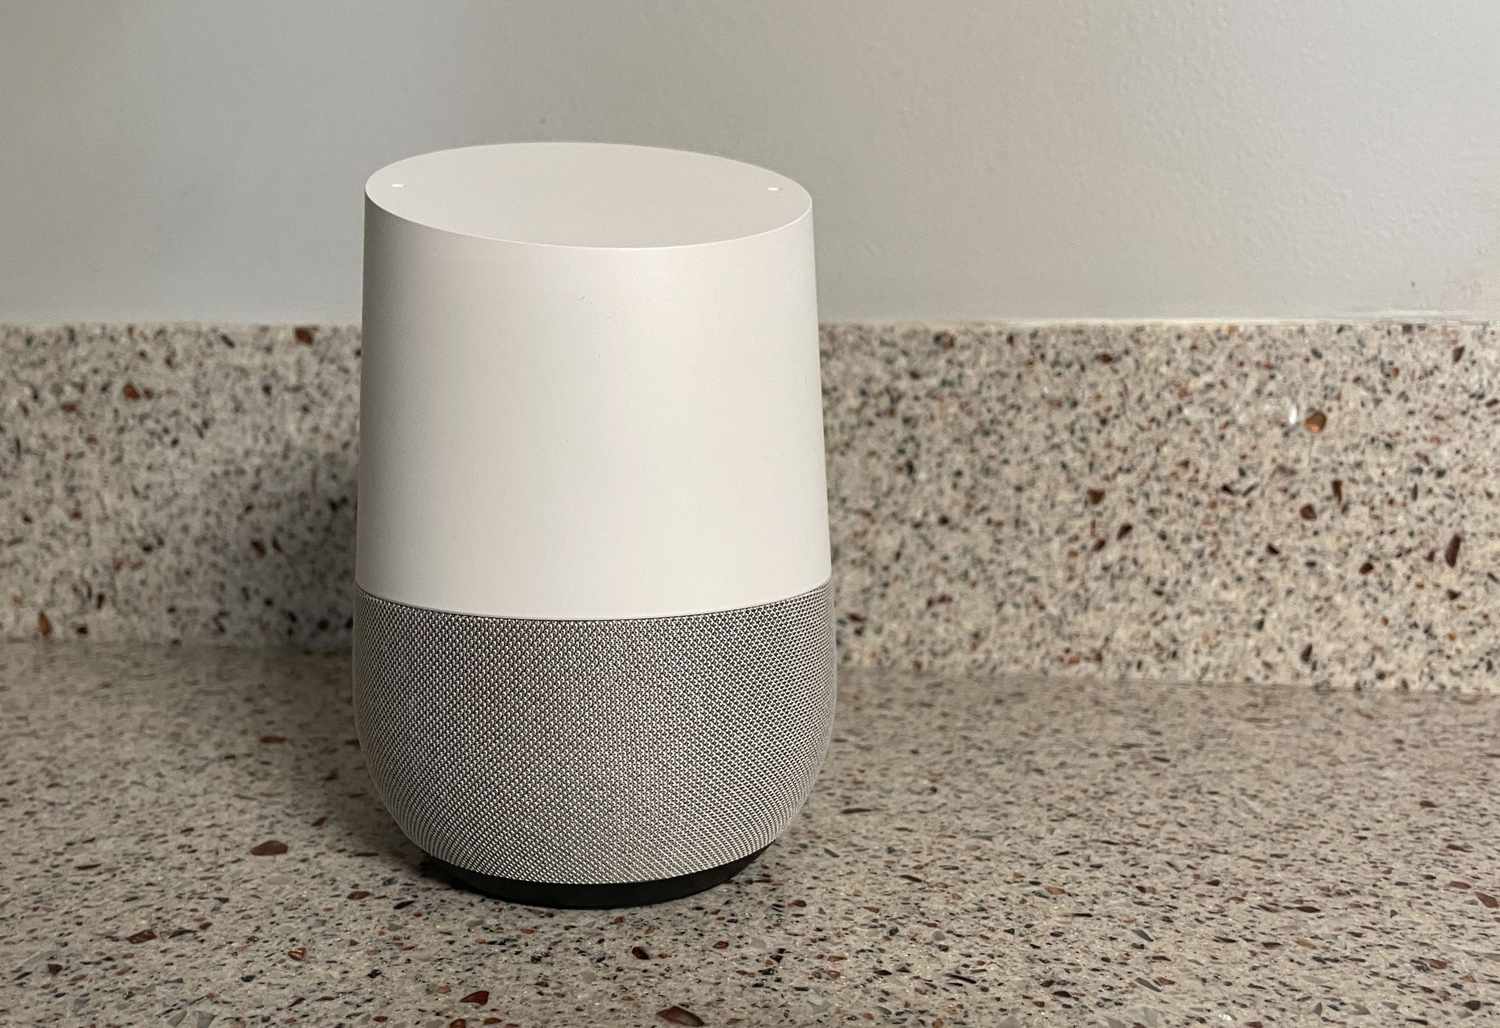 How To Use Google Home